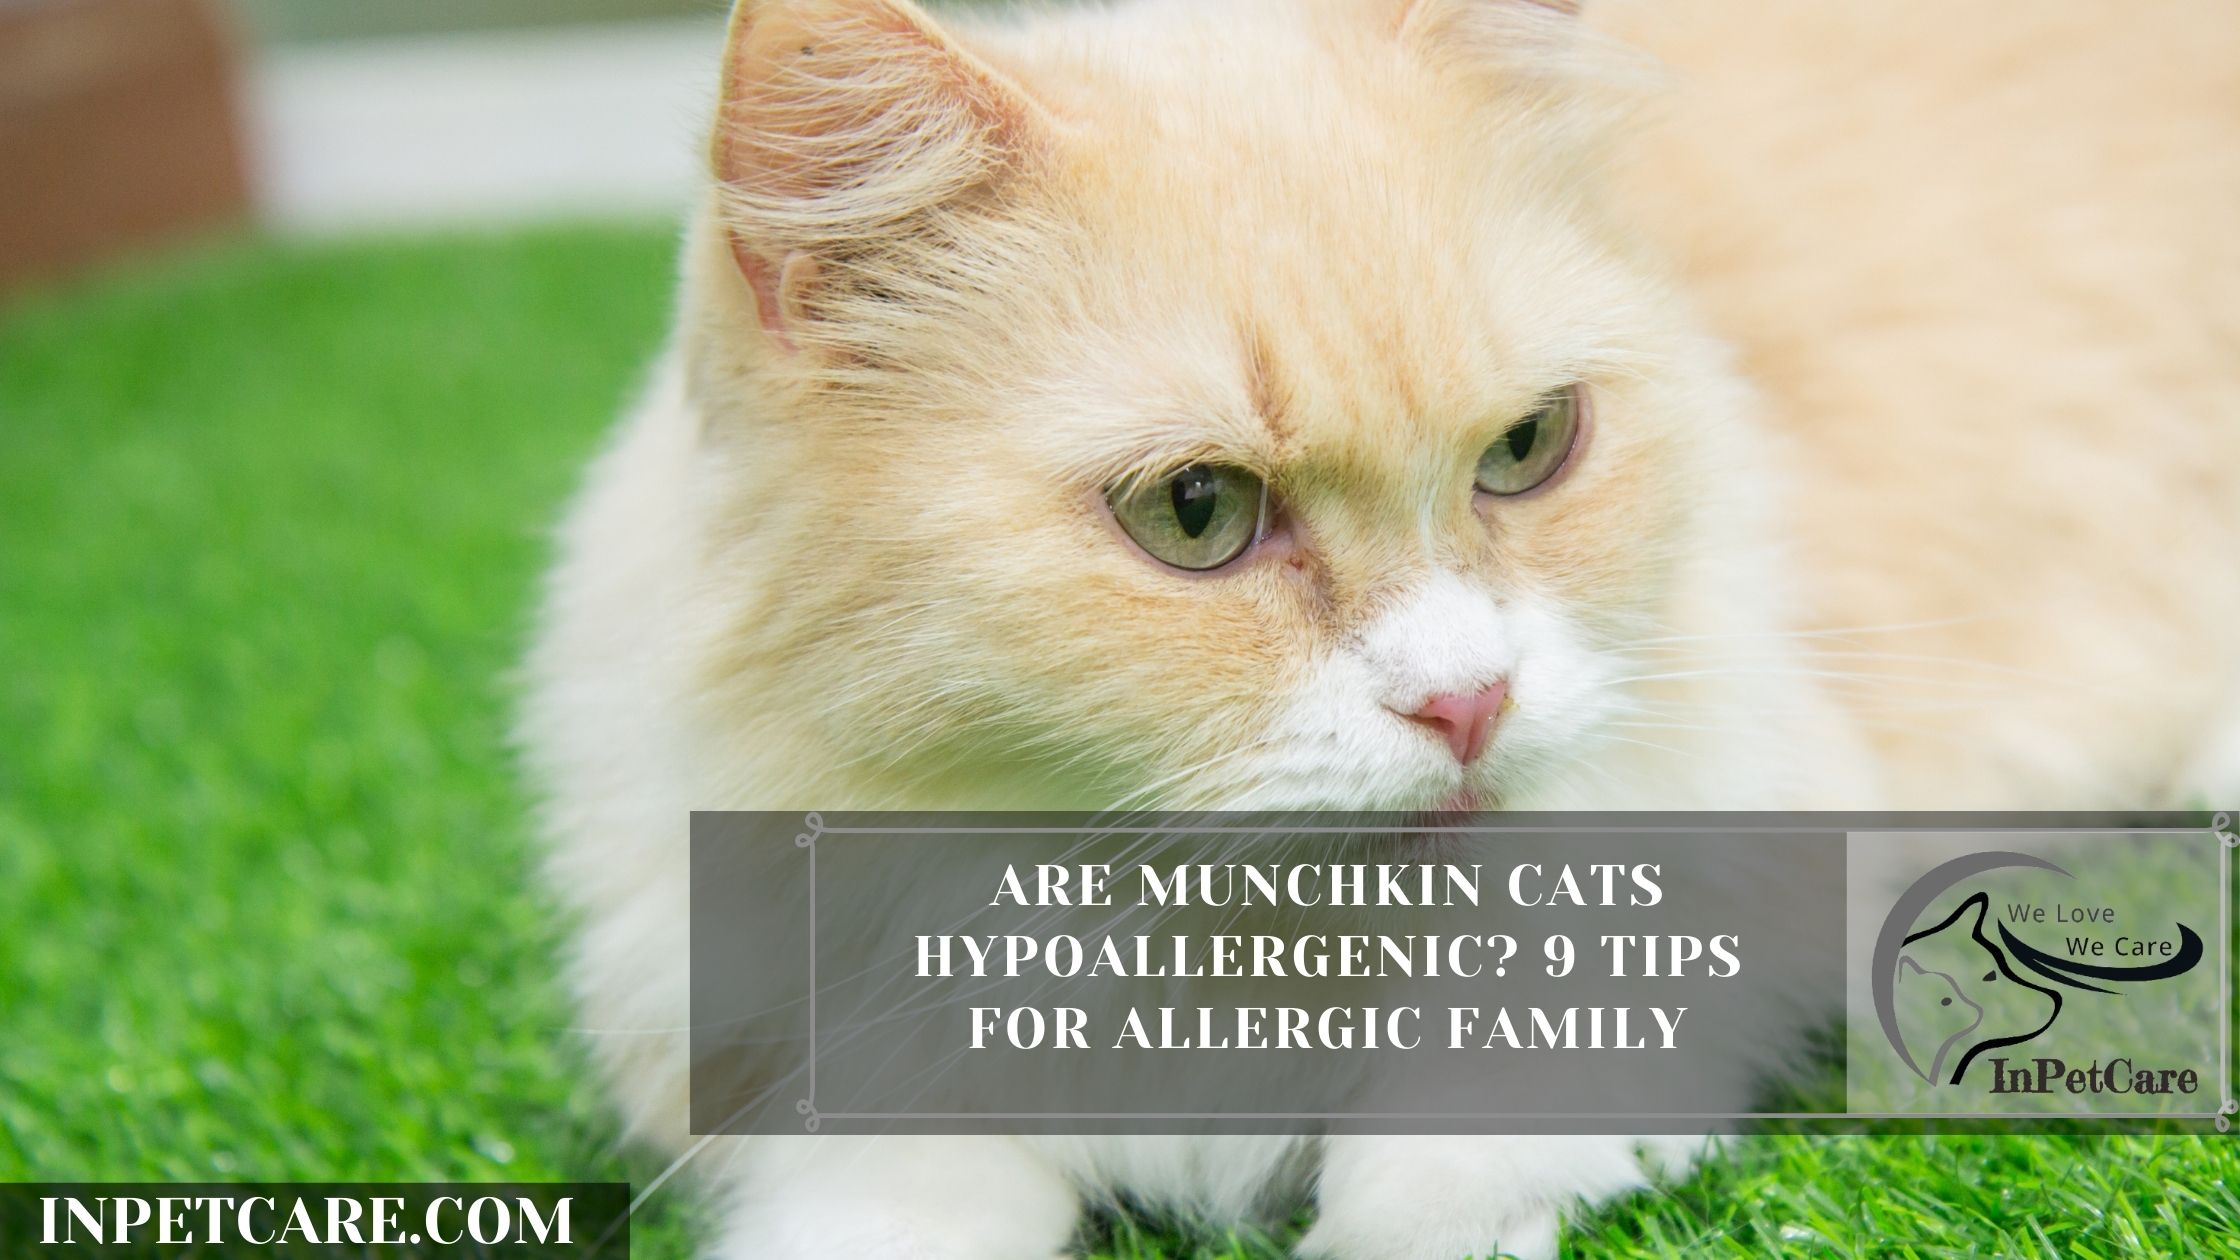 Are Munchkin Cats Hypoallergenic? 9 Tips For Allergic Family